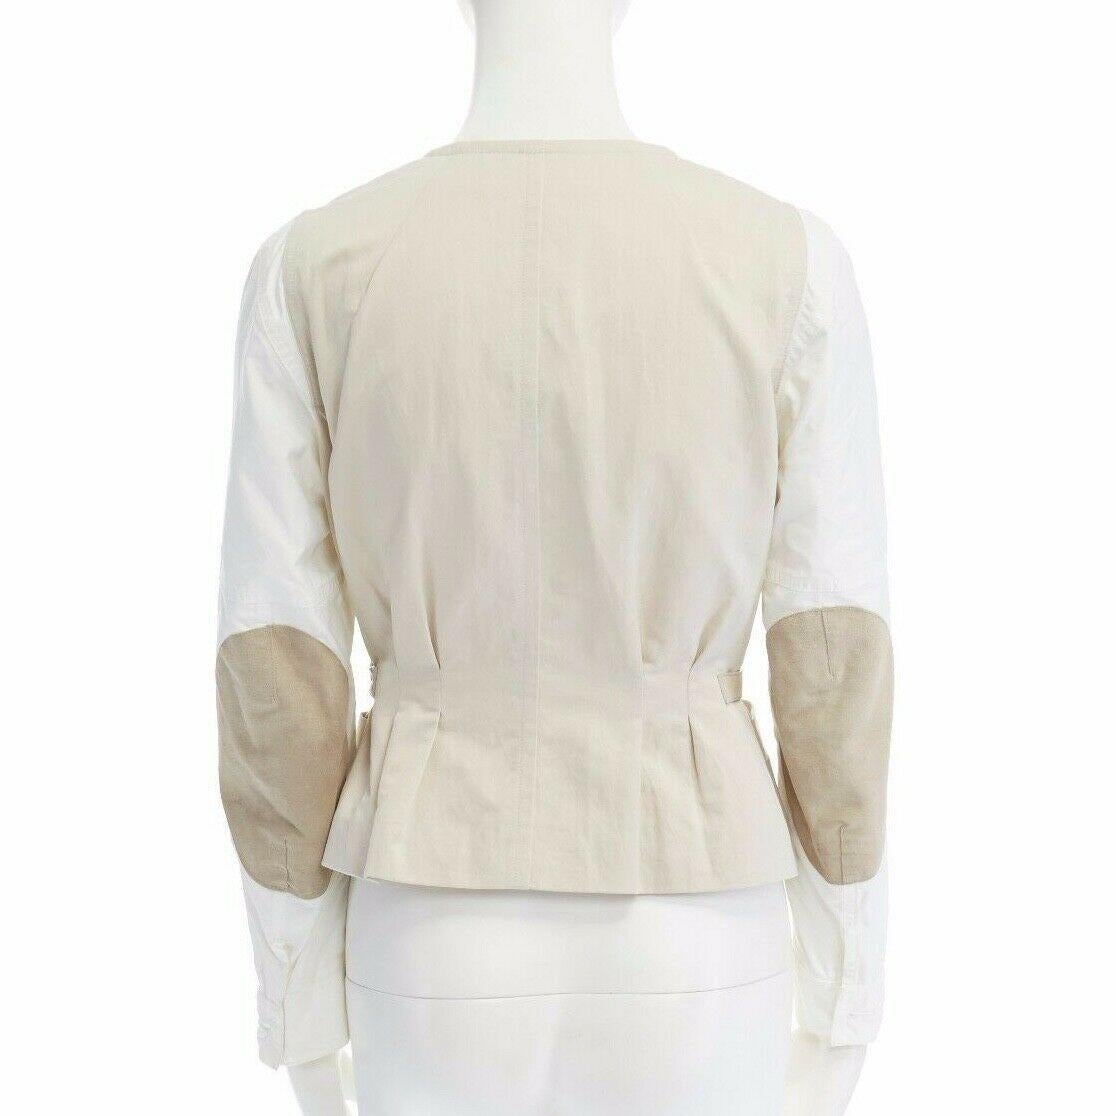 runway DRIES VAN NOTEN cream white contrast sleeve belted bomber jacket FR38 M
DRIES VAN NOTEN
FROM THE SPRING SUMMER 2011 RUNWAY
WHITE AND BEIGE . 
BEIGE BODY . 
COLLAR-LESS POPPER BUTTON FRONT CLOSURE .
 DUAL SLIT FRONT POCKET . 
CONTRASTING